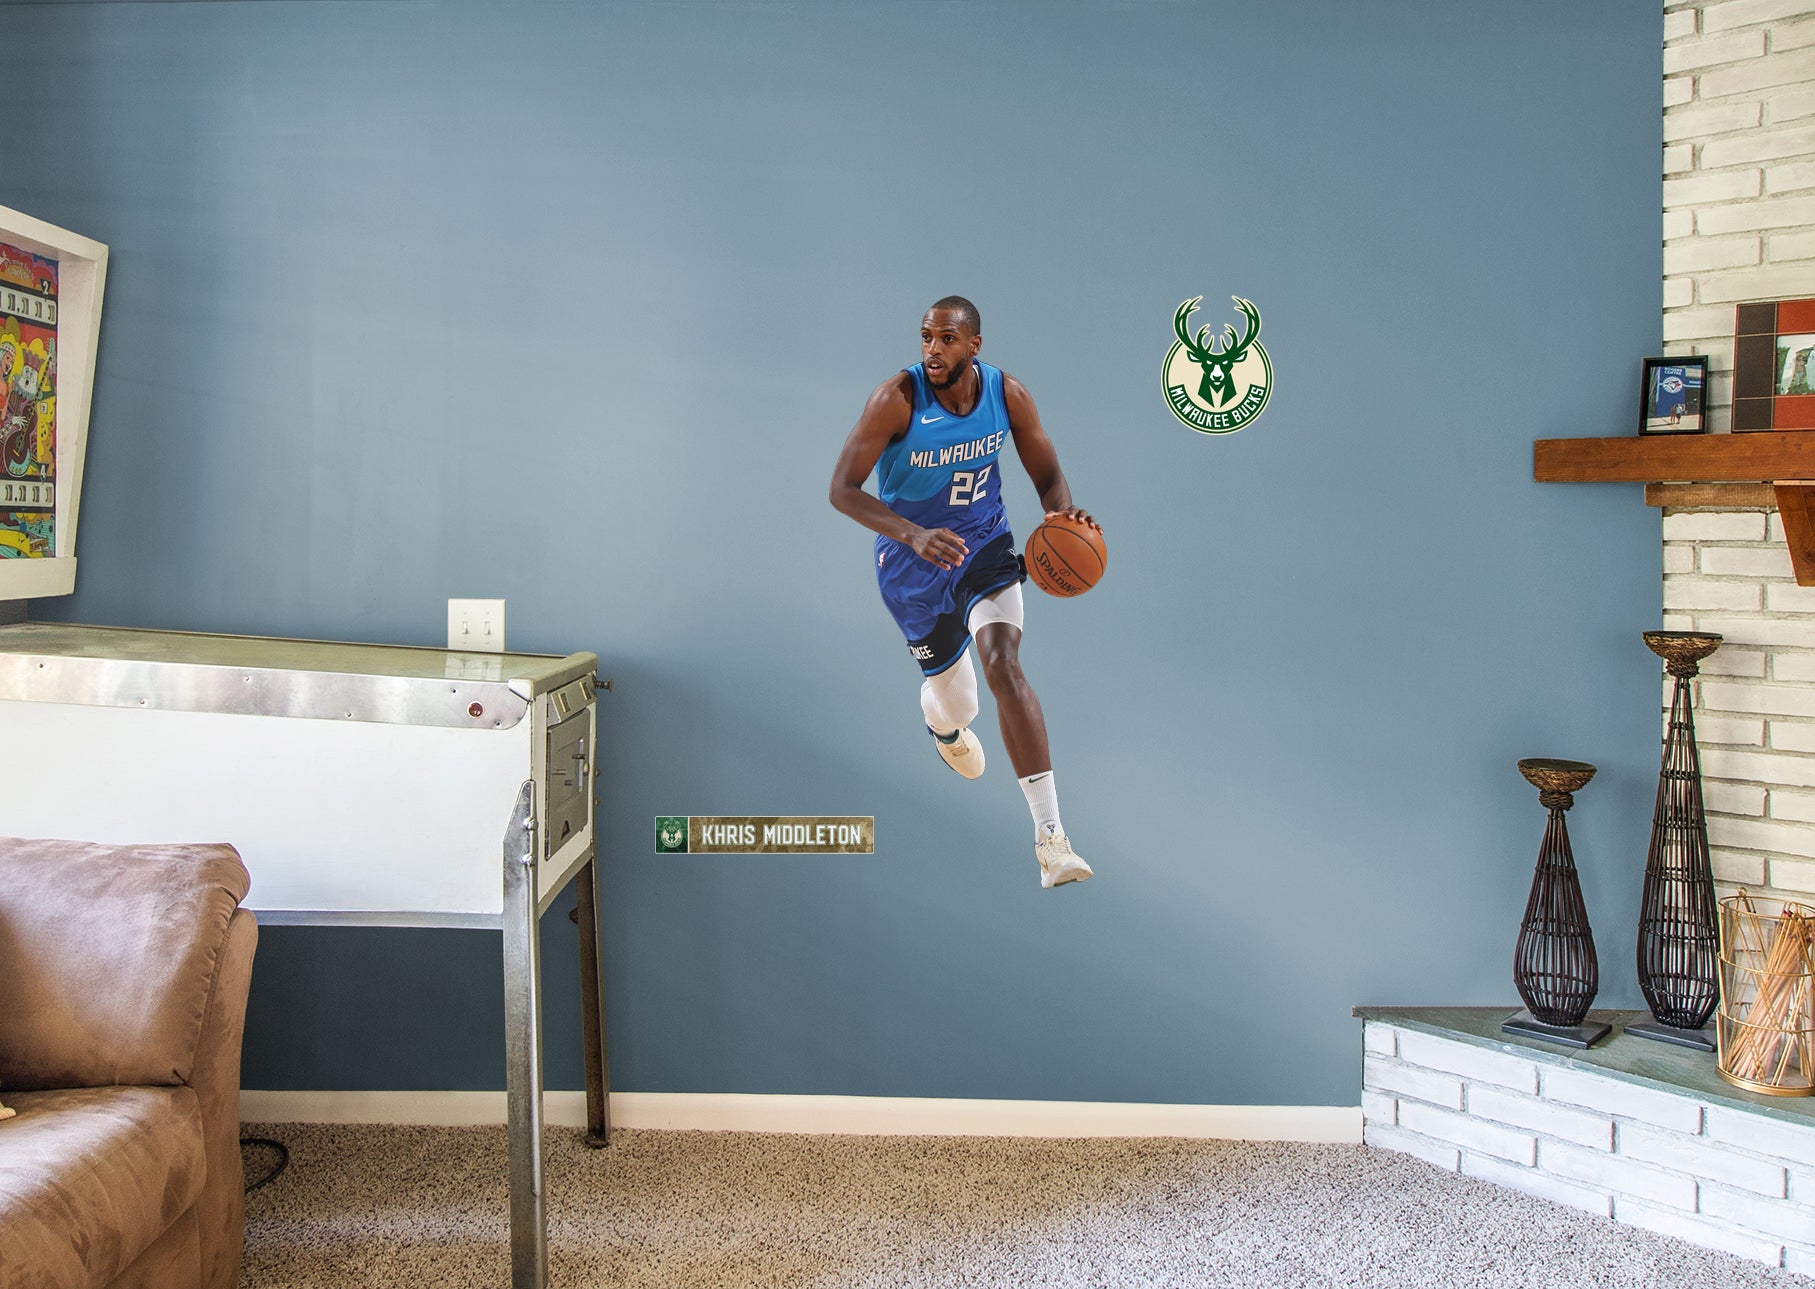 Khris Middleton 2021 Blue Jersey for Milwaukee Bucks - Officially Licensed NBA Removable Wall Decal Giant Athlete + 2 Decals (24